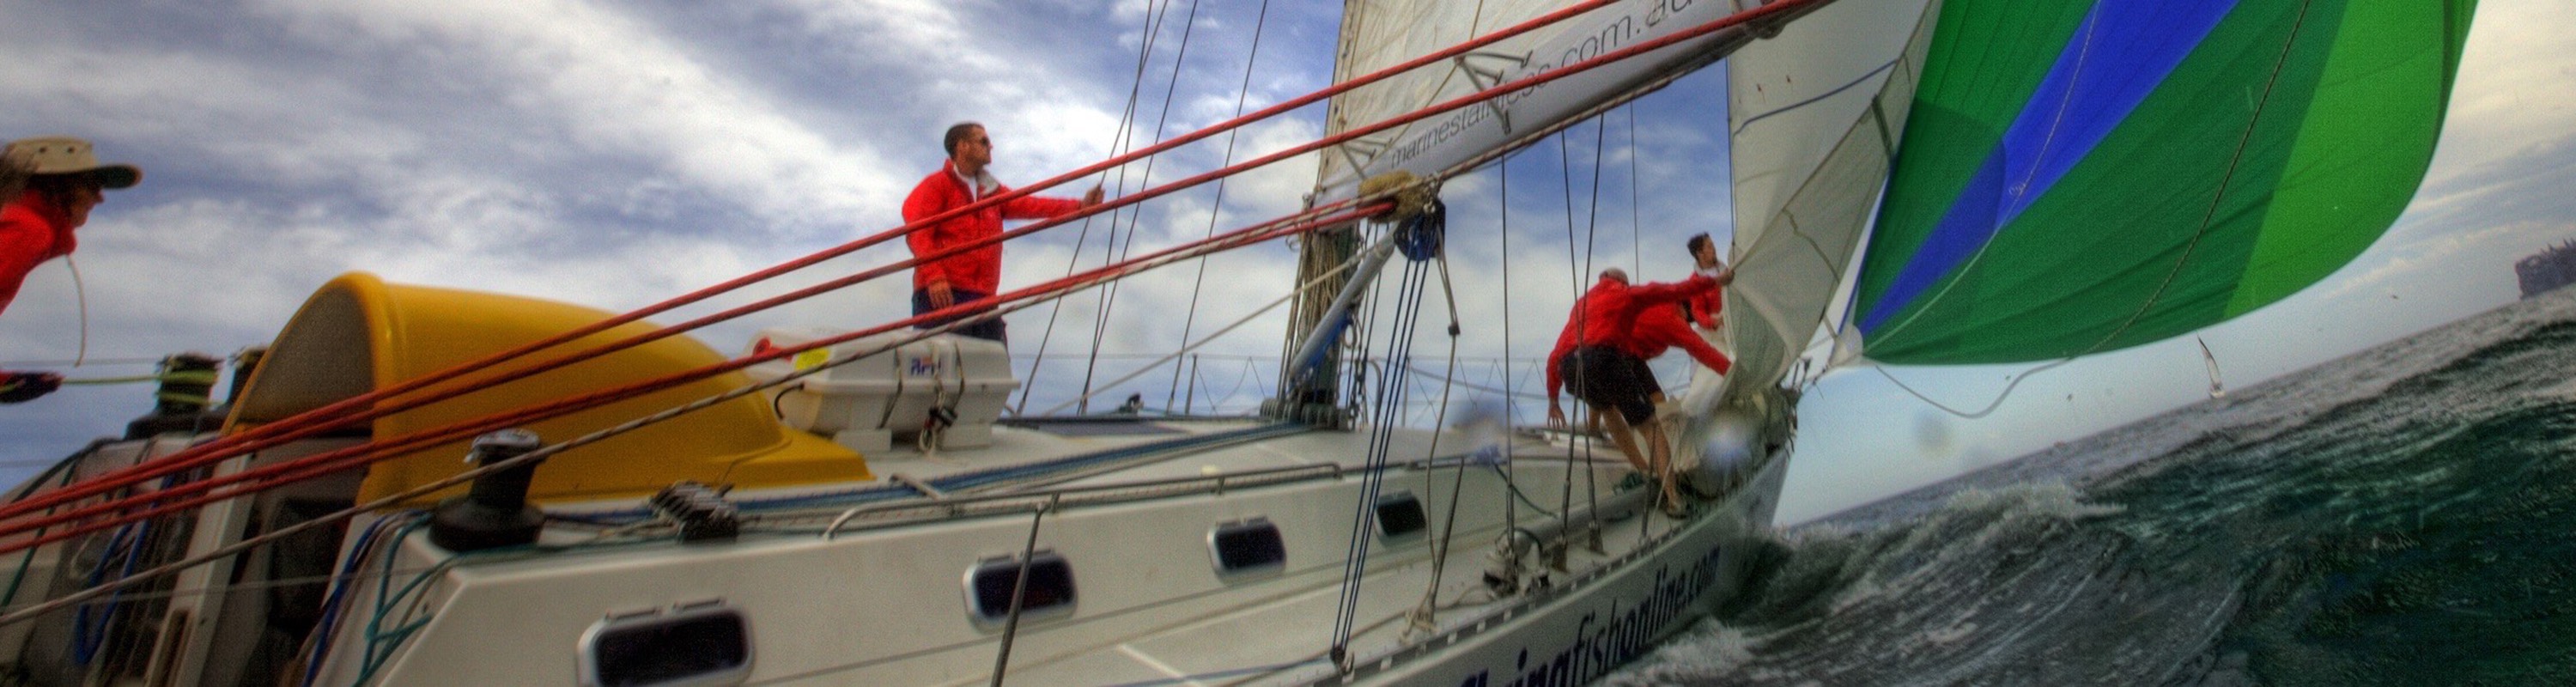 Sydney to Hobart Campaign - Flying Fish Sail Academy